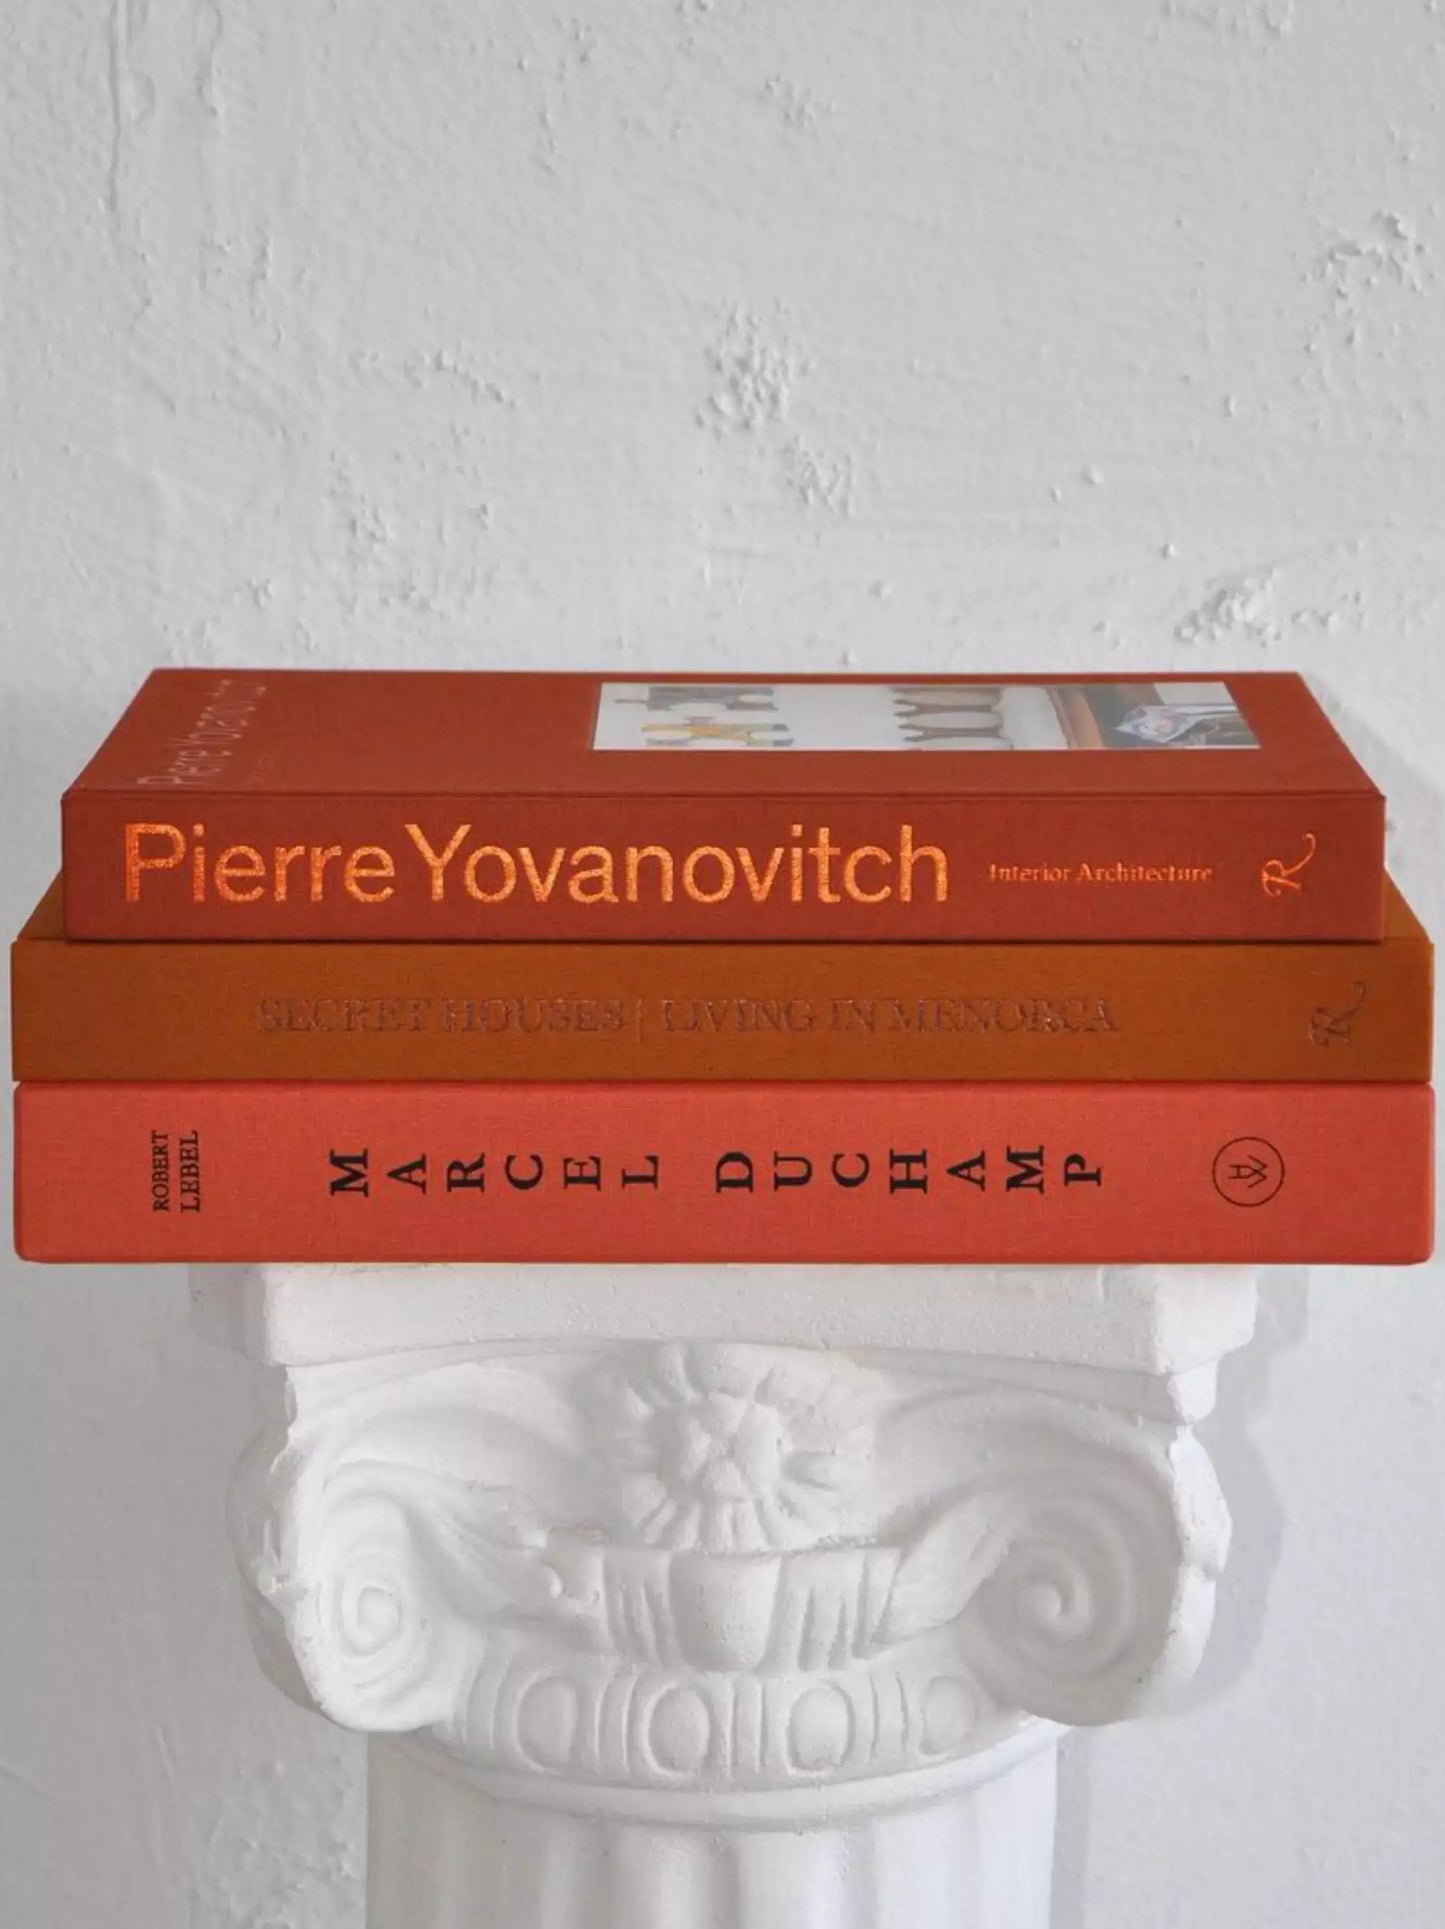 The Orange Coffee Table Book Stack